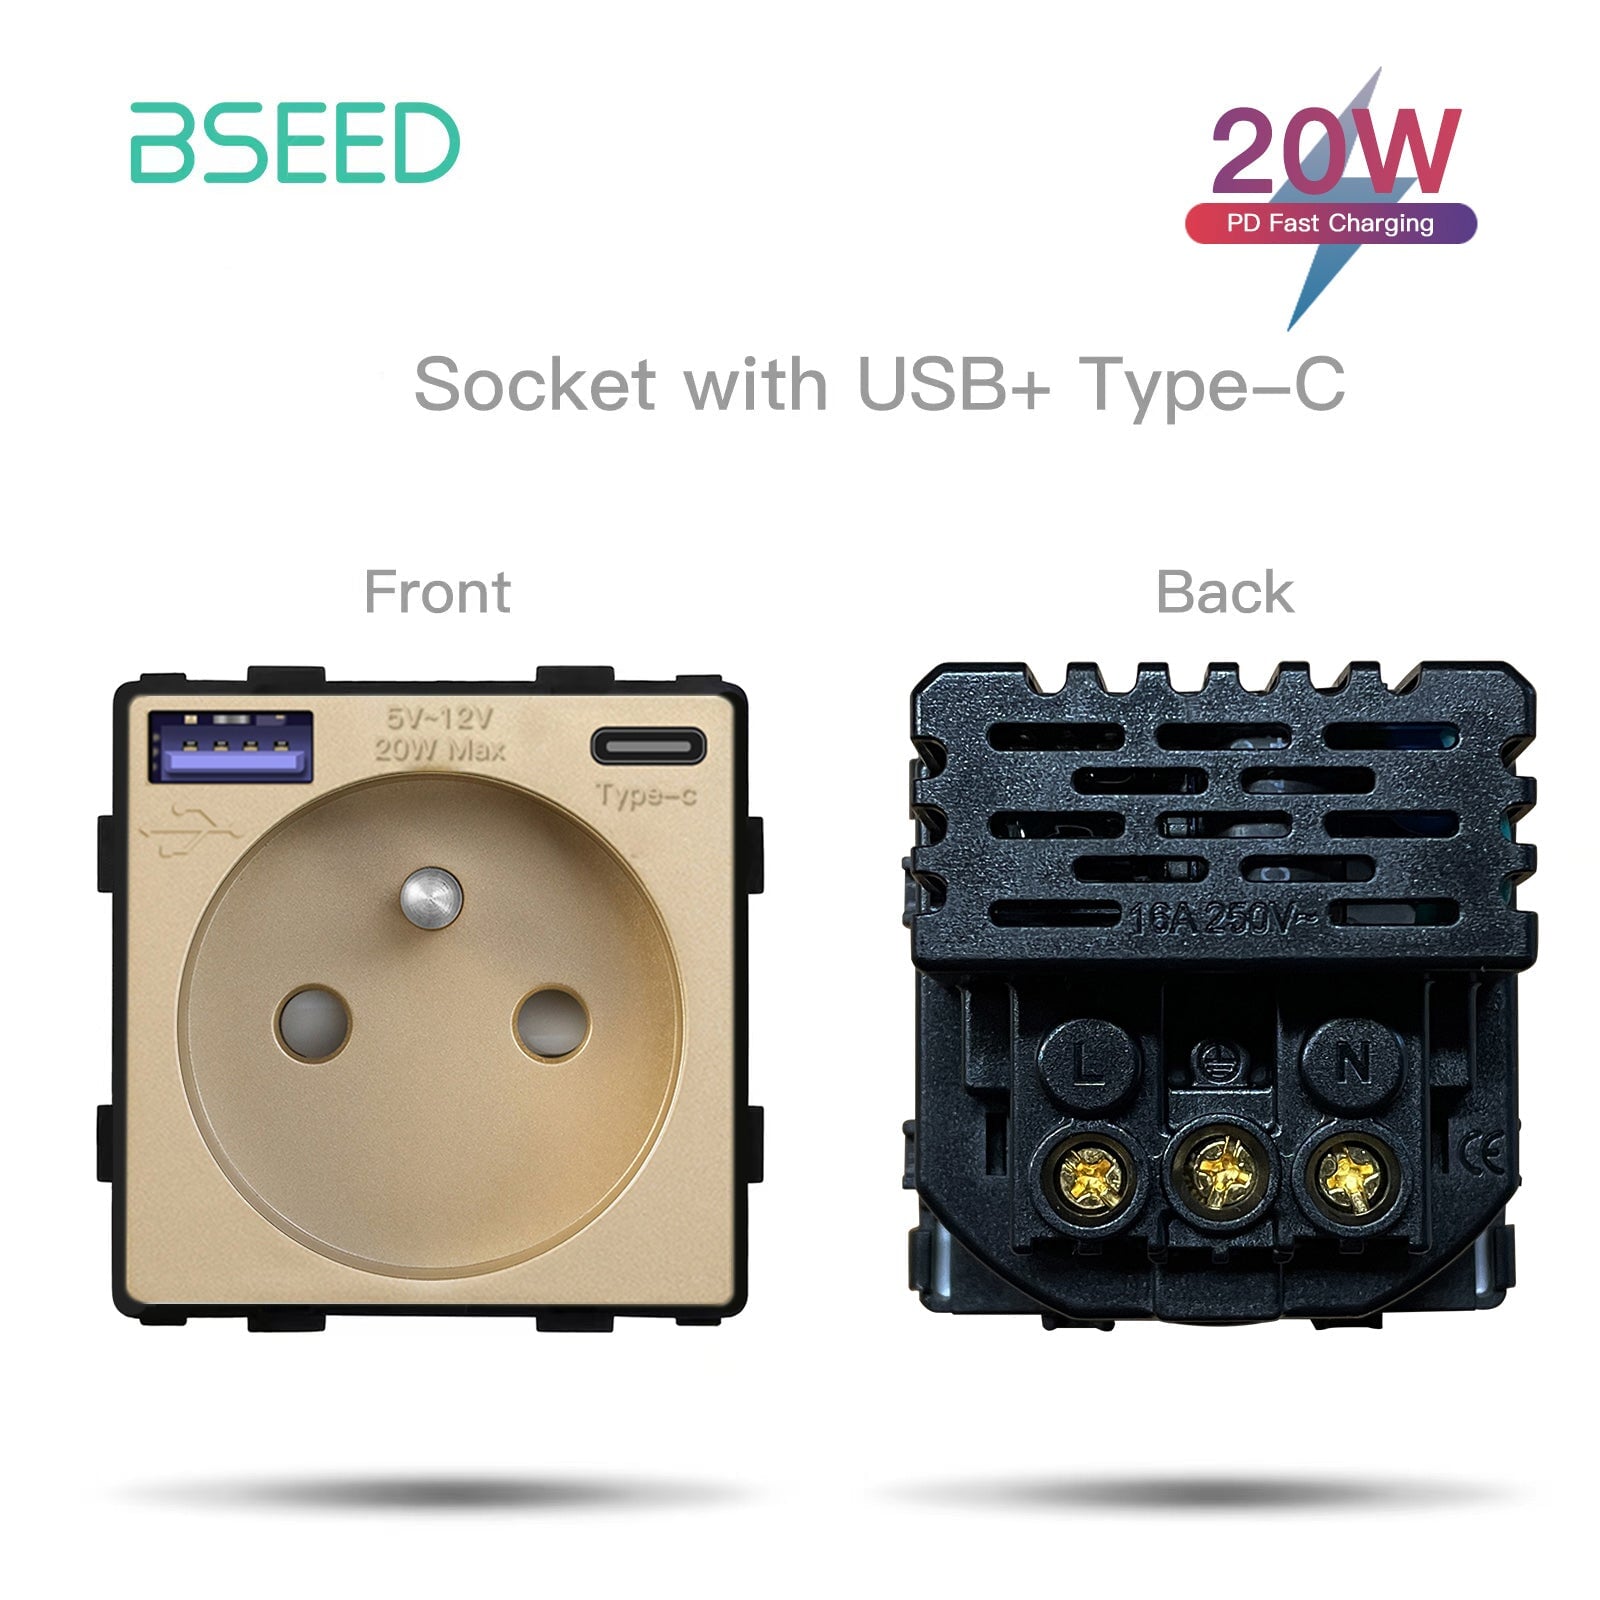 BSEED French Type-C Interface Outlet Wall Socket 16A USB Charge Power Outlets & Sockets Bseedswitch Gold 20W 